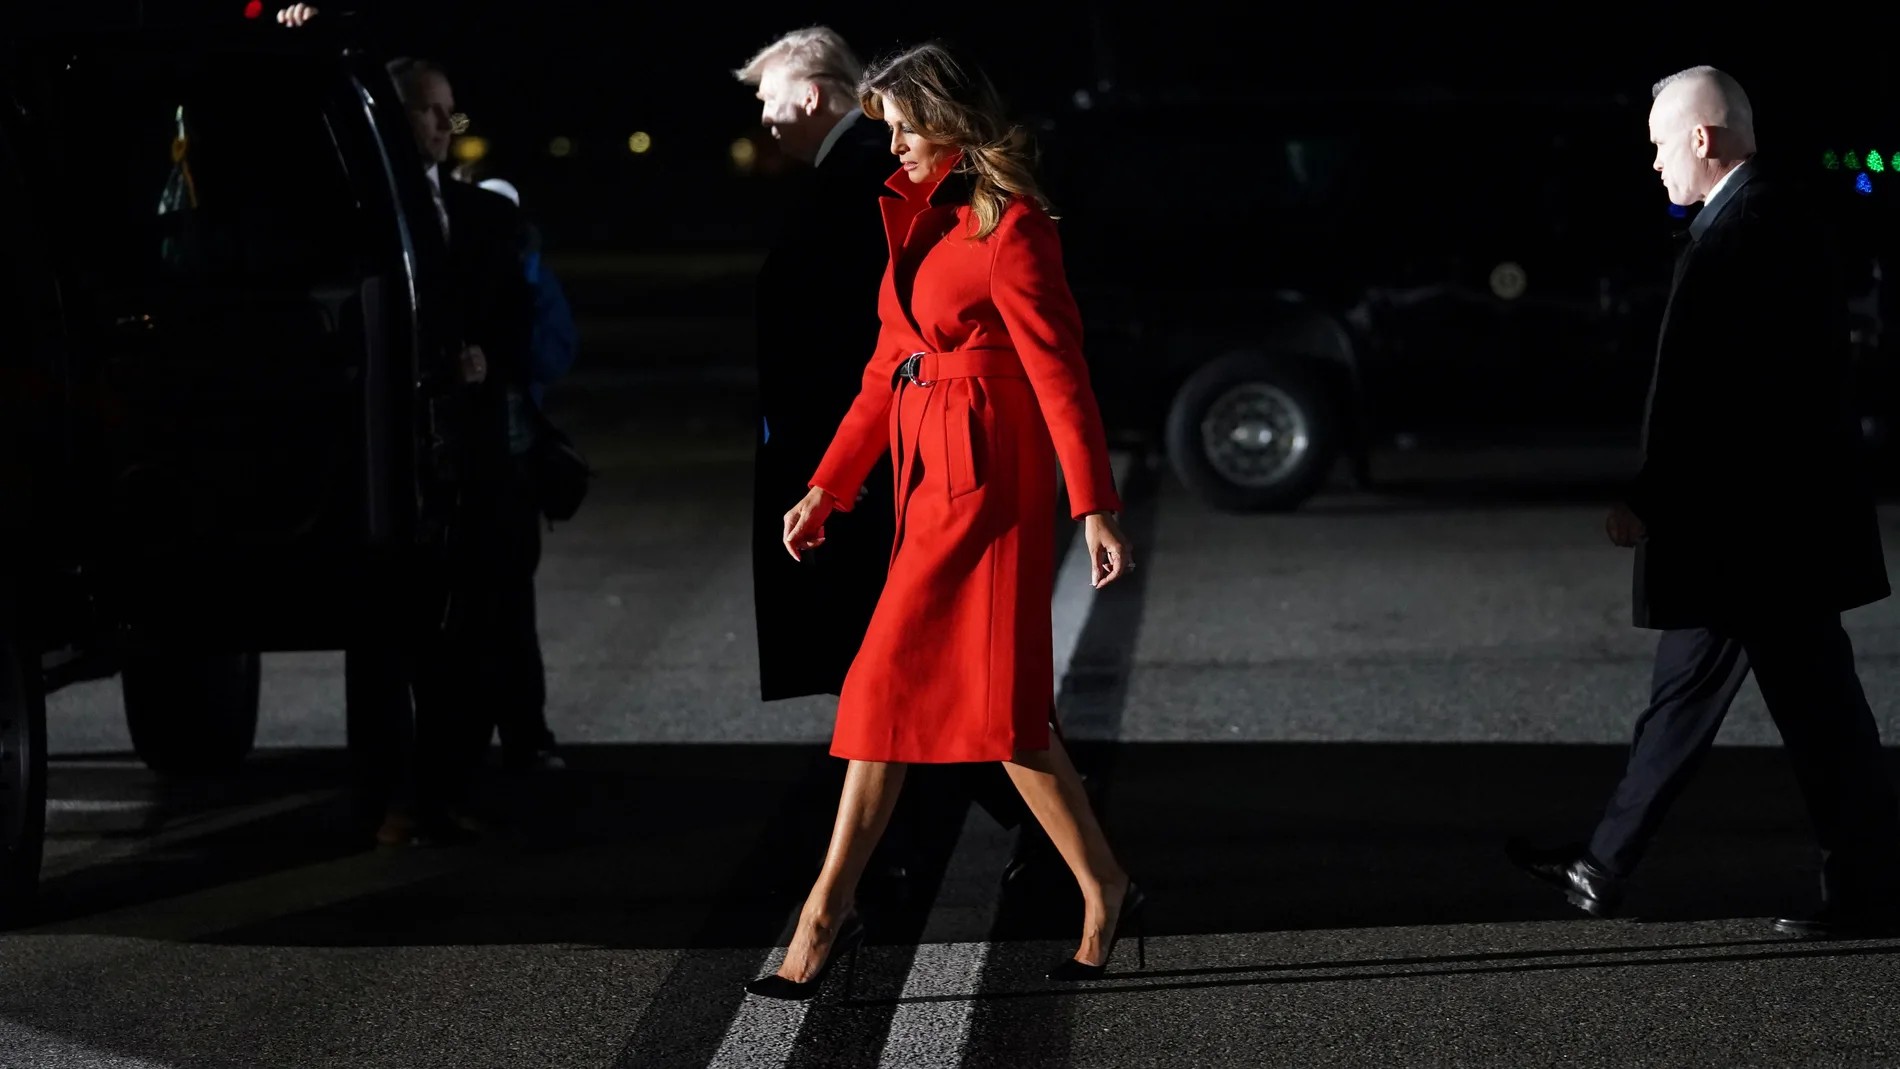 U.S. President Donald Trump and first lady Melania arrive at Stansted Airport